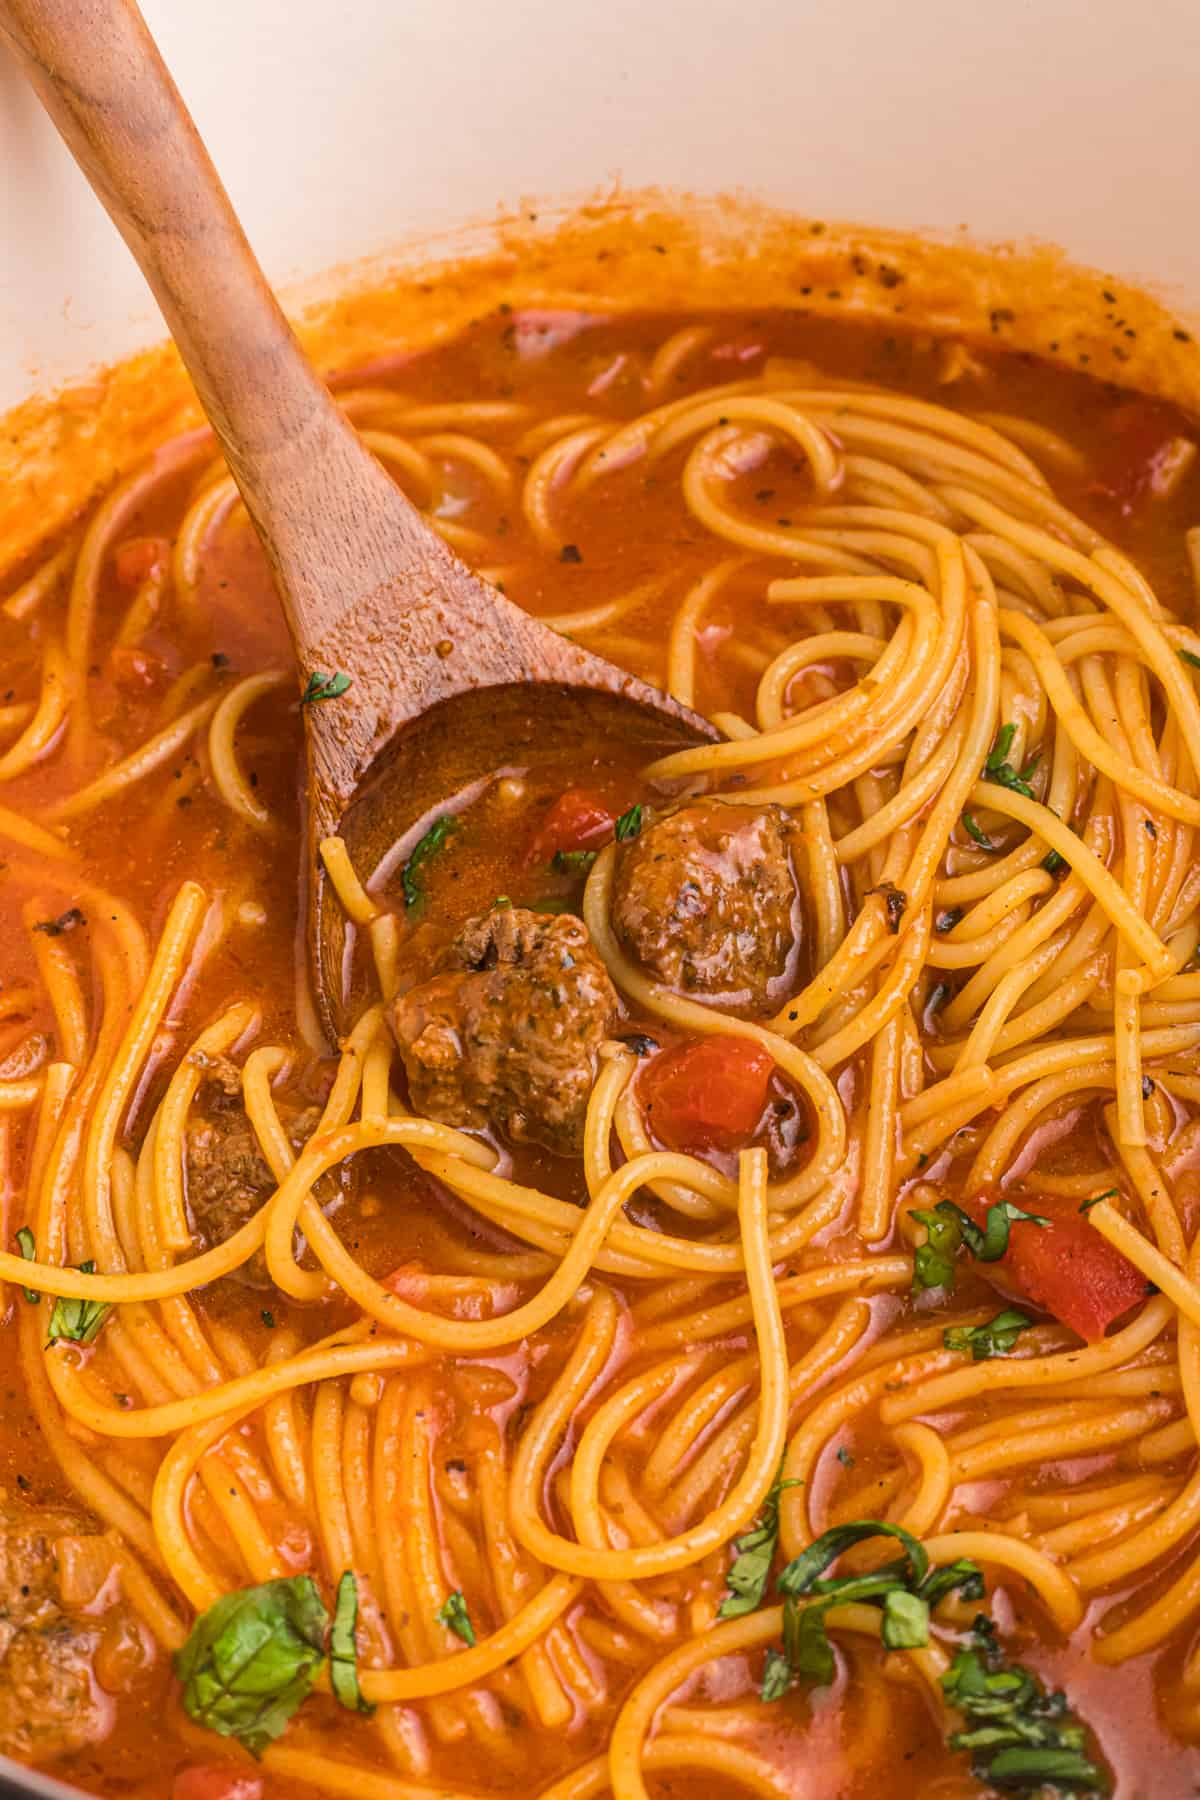 A wooden spoon is placed in a bowl of spaghetti and meatball stew.